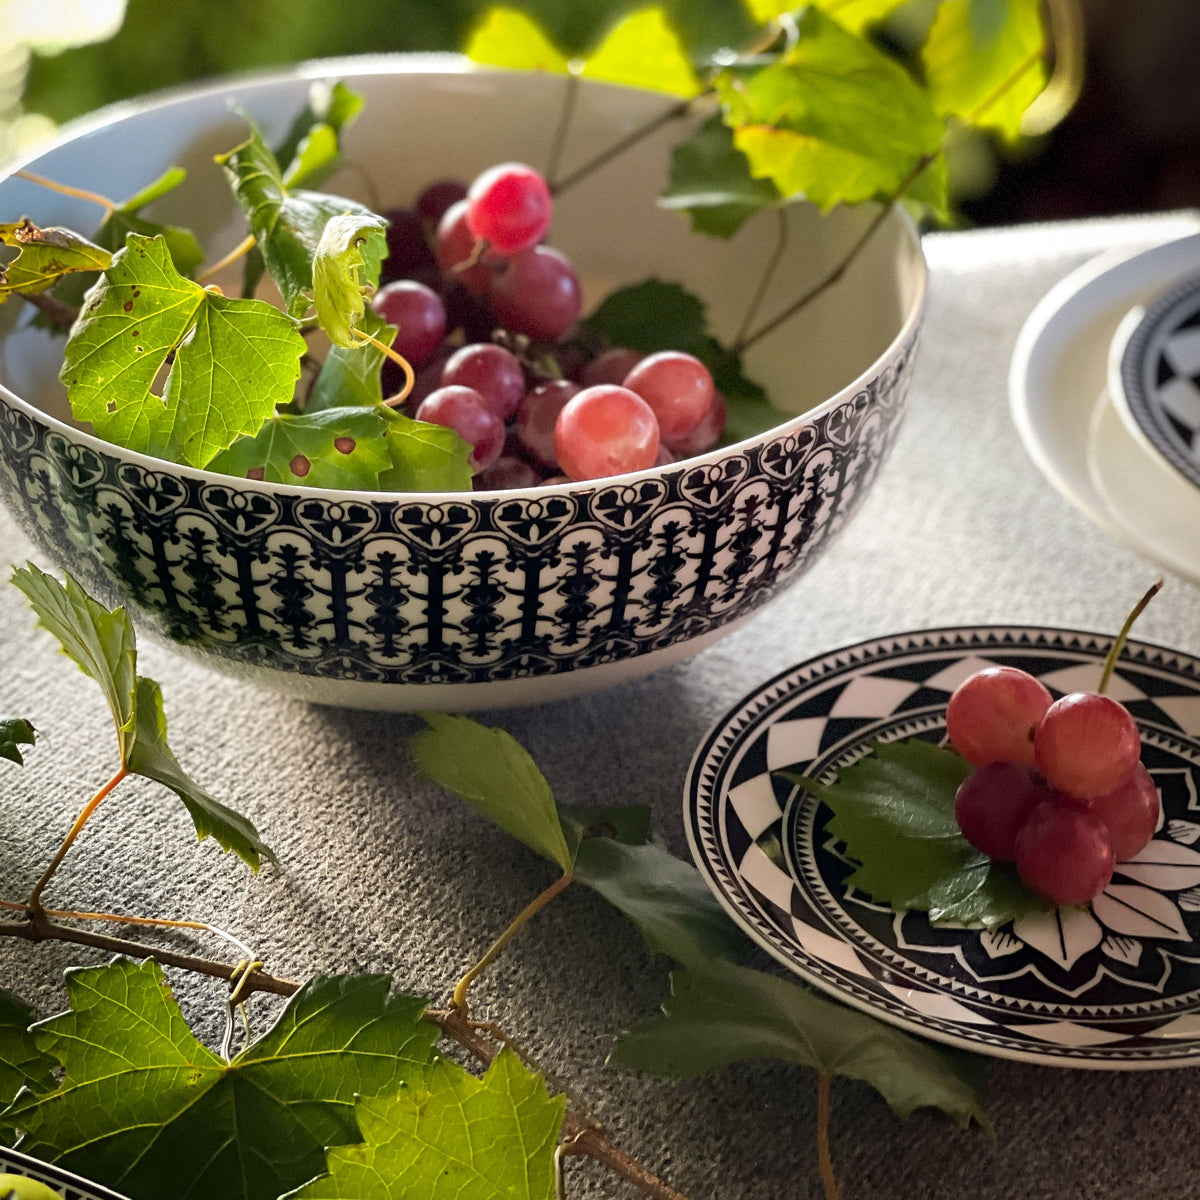 A patterned bowl and Fez Small Plates by Caskata Artisanal Home, showcasing bold geometrics, hold red grapes and grape leaves on a tablecloth, with sunlight providing illumination.